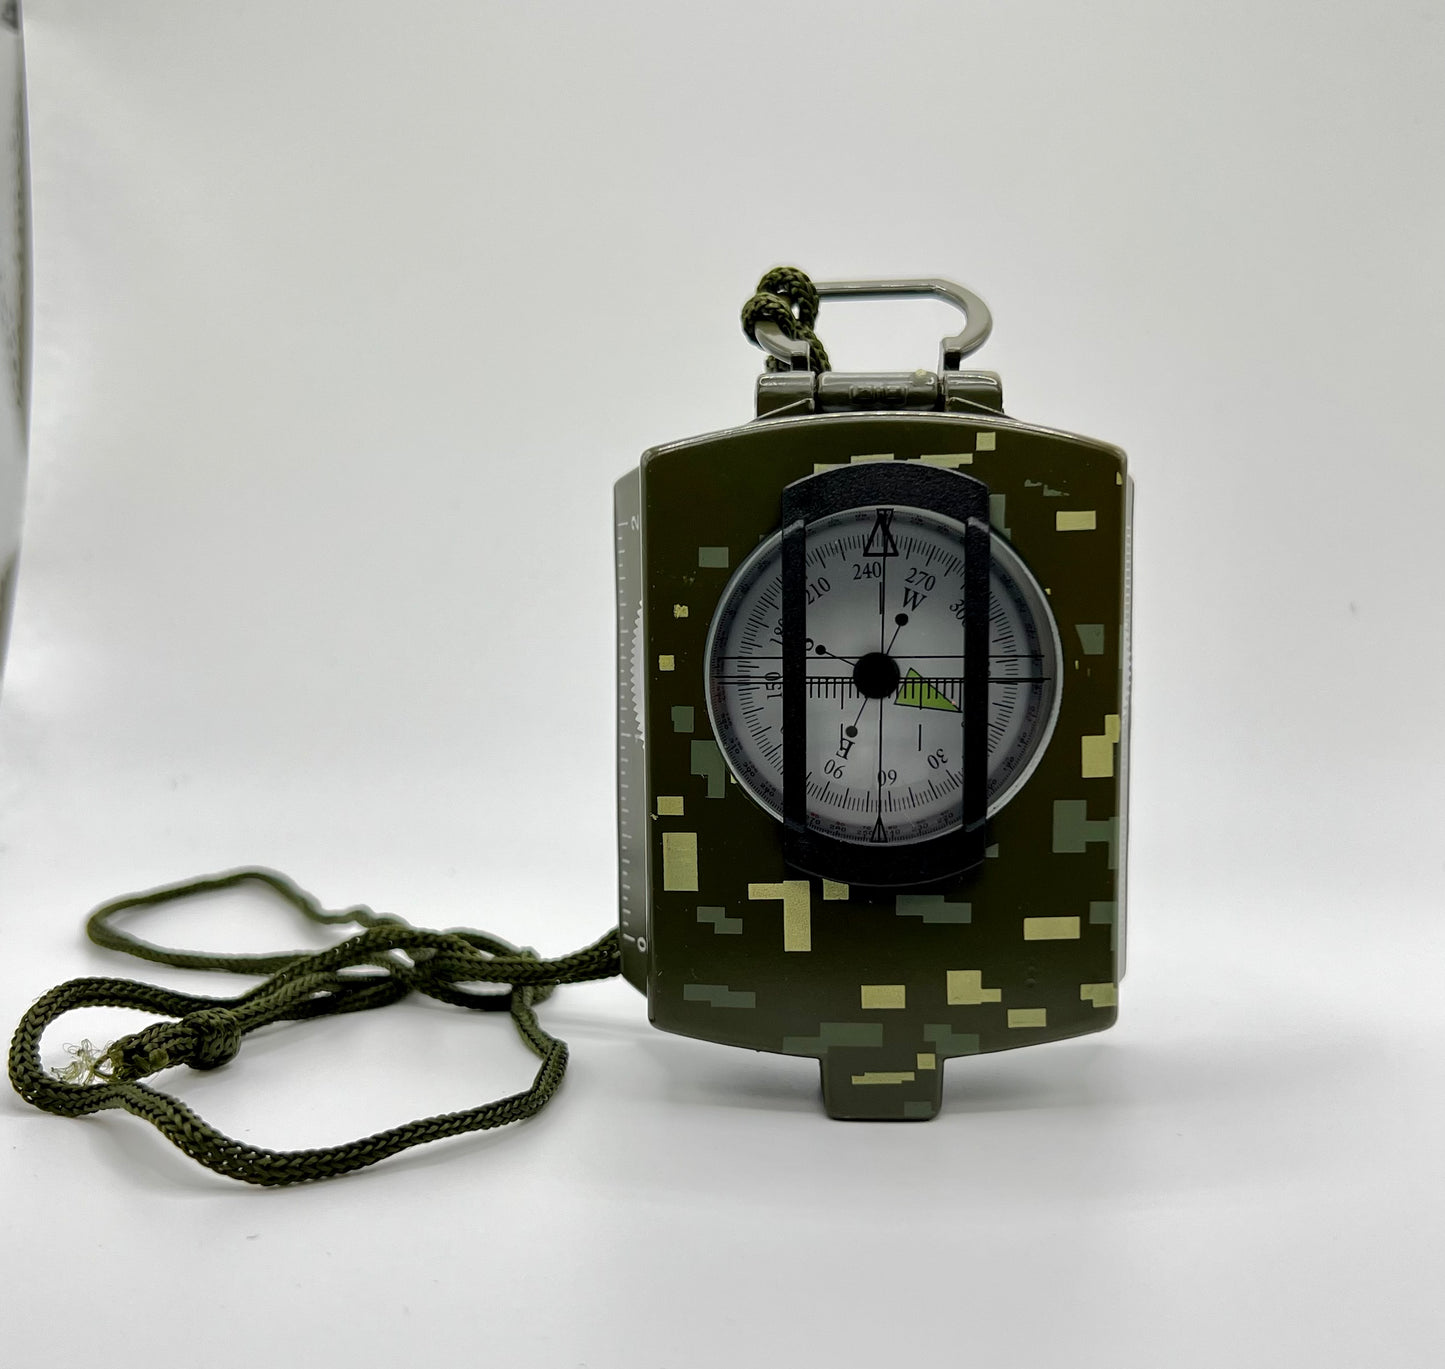 Military-Style Compass with Bubble Level and Carrying Case